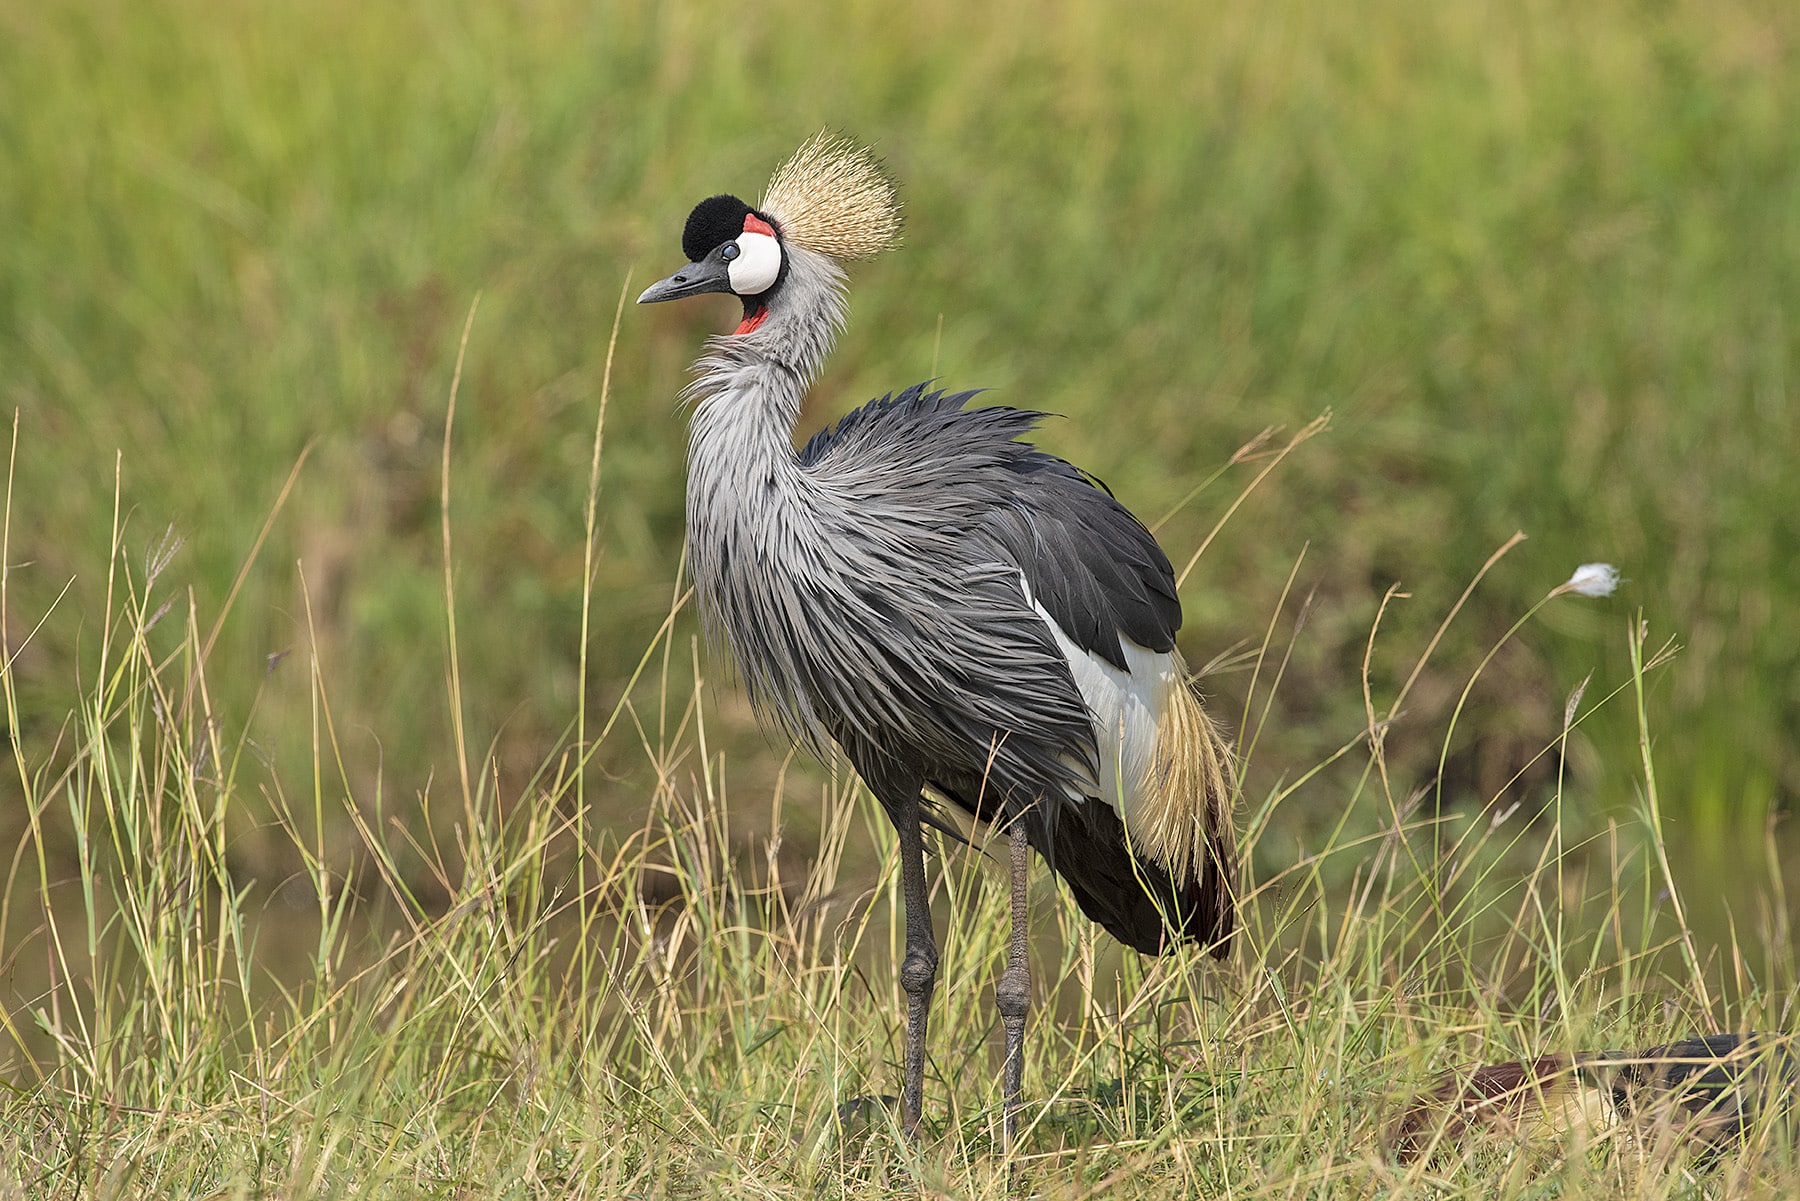 Amidst Kenya's landscapes, the elegant Grey Crowned bird stands out as a captivating sight, adding a touch of grace and beauty to the wilderness experience during luxurious safari.